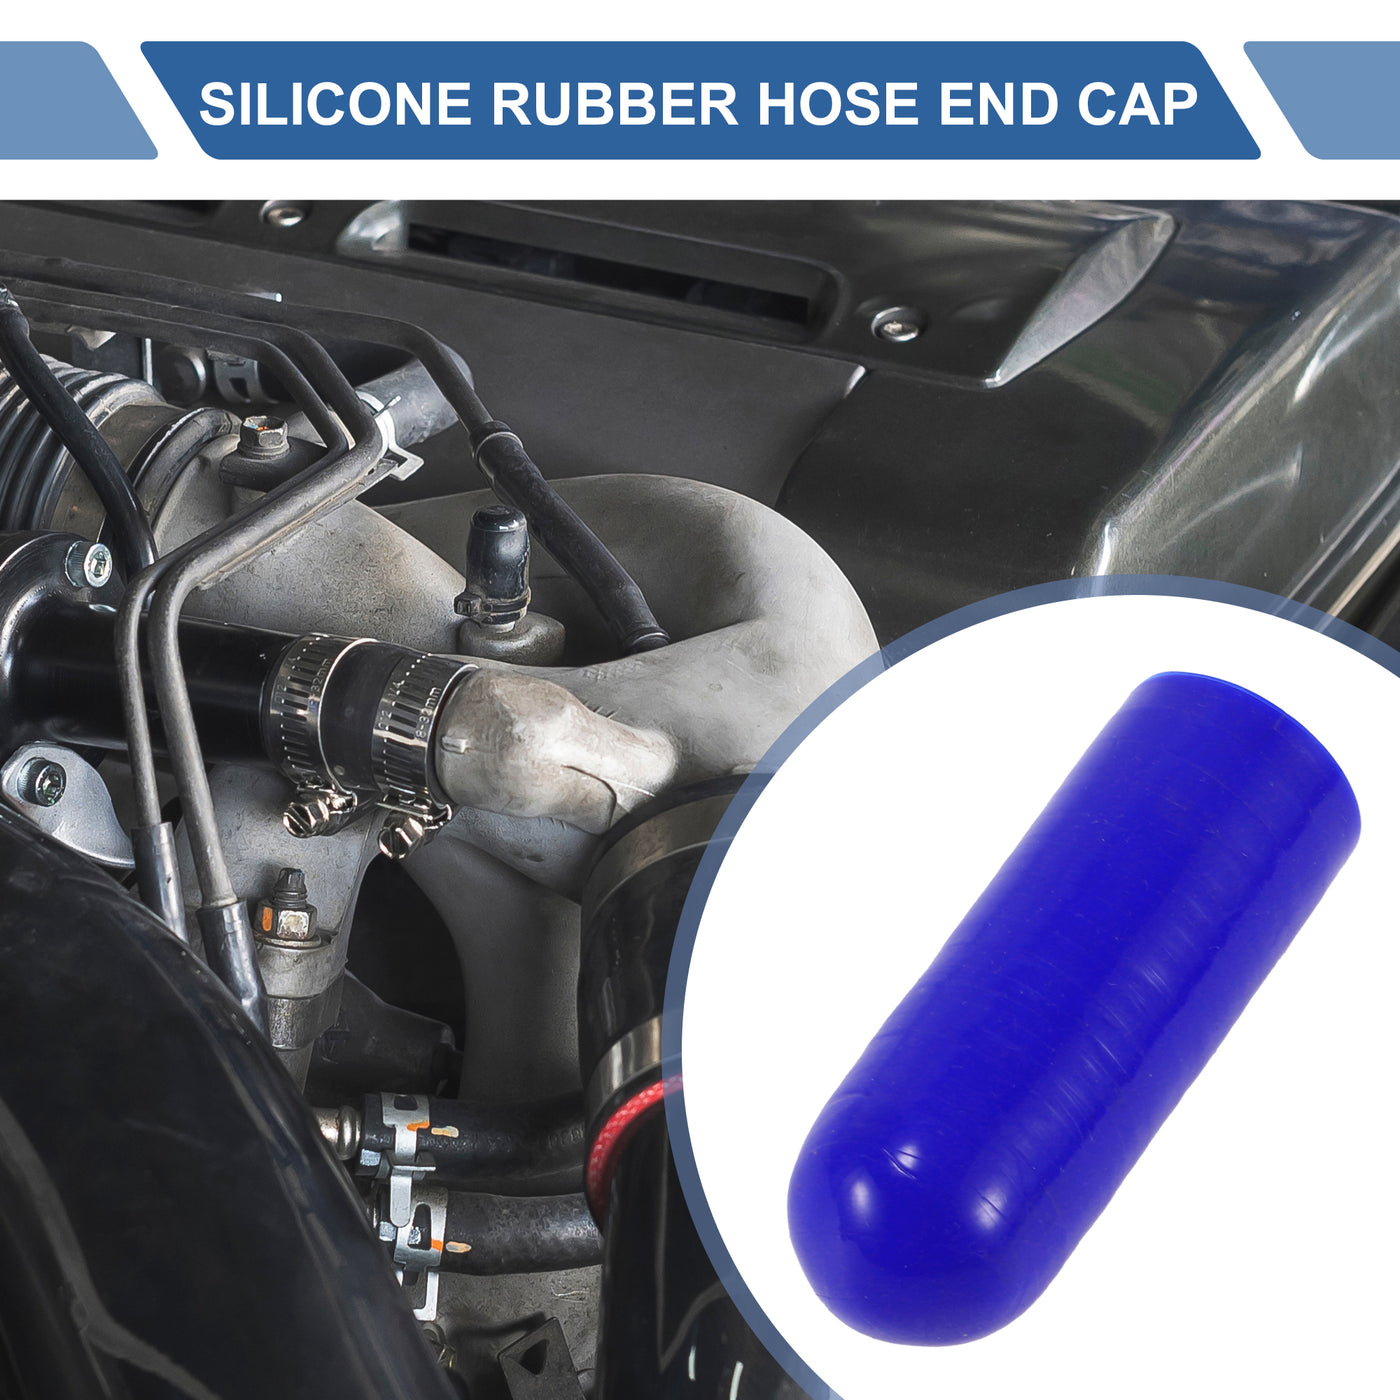 X AUTOHAUX 1 Pcs 60mm Length 20mm/0.79" ID Blue Car Silicone Rubber Hose End Cap with Clamp Silicone Reinforced Blanking Cap for Bypass Tube Universal